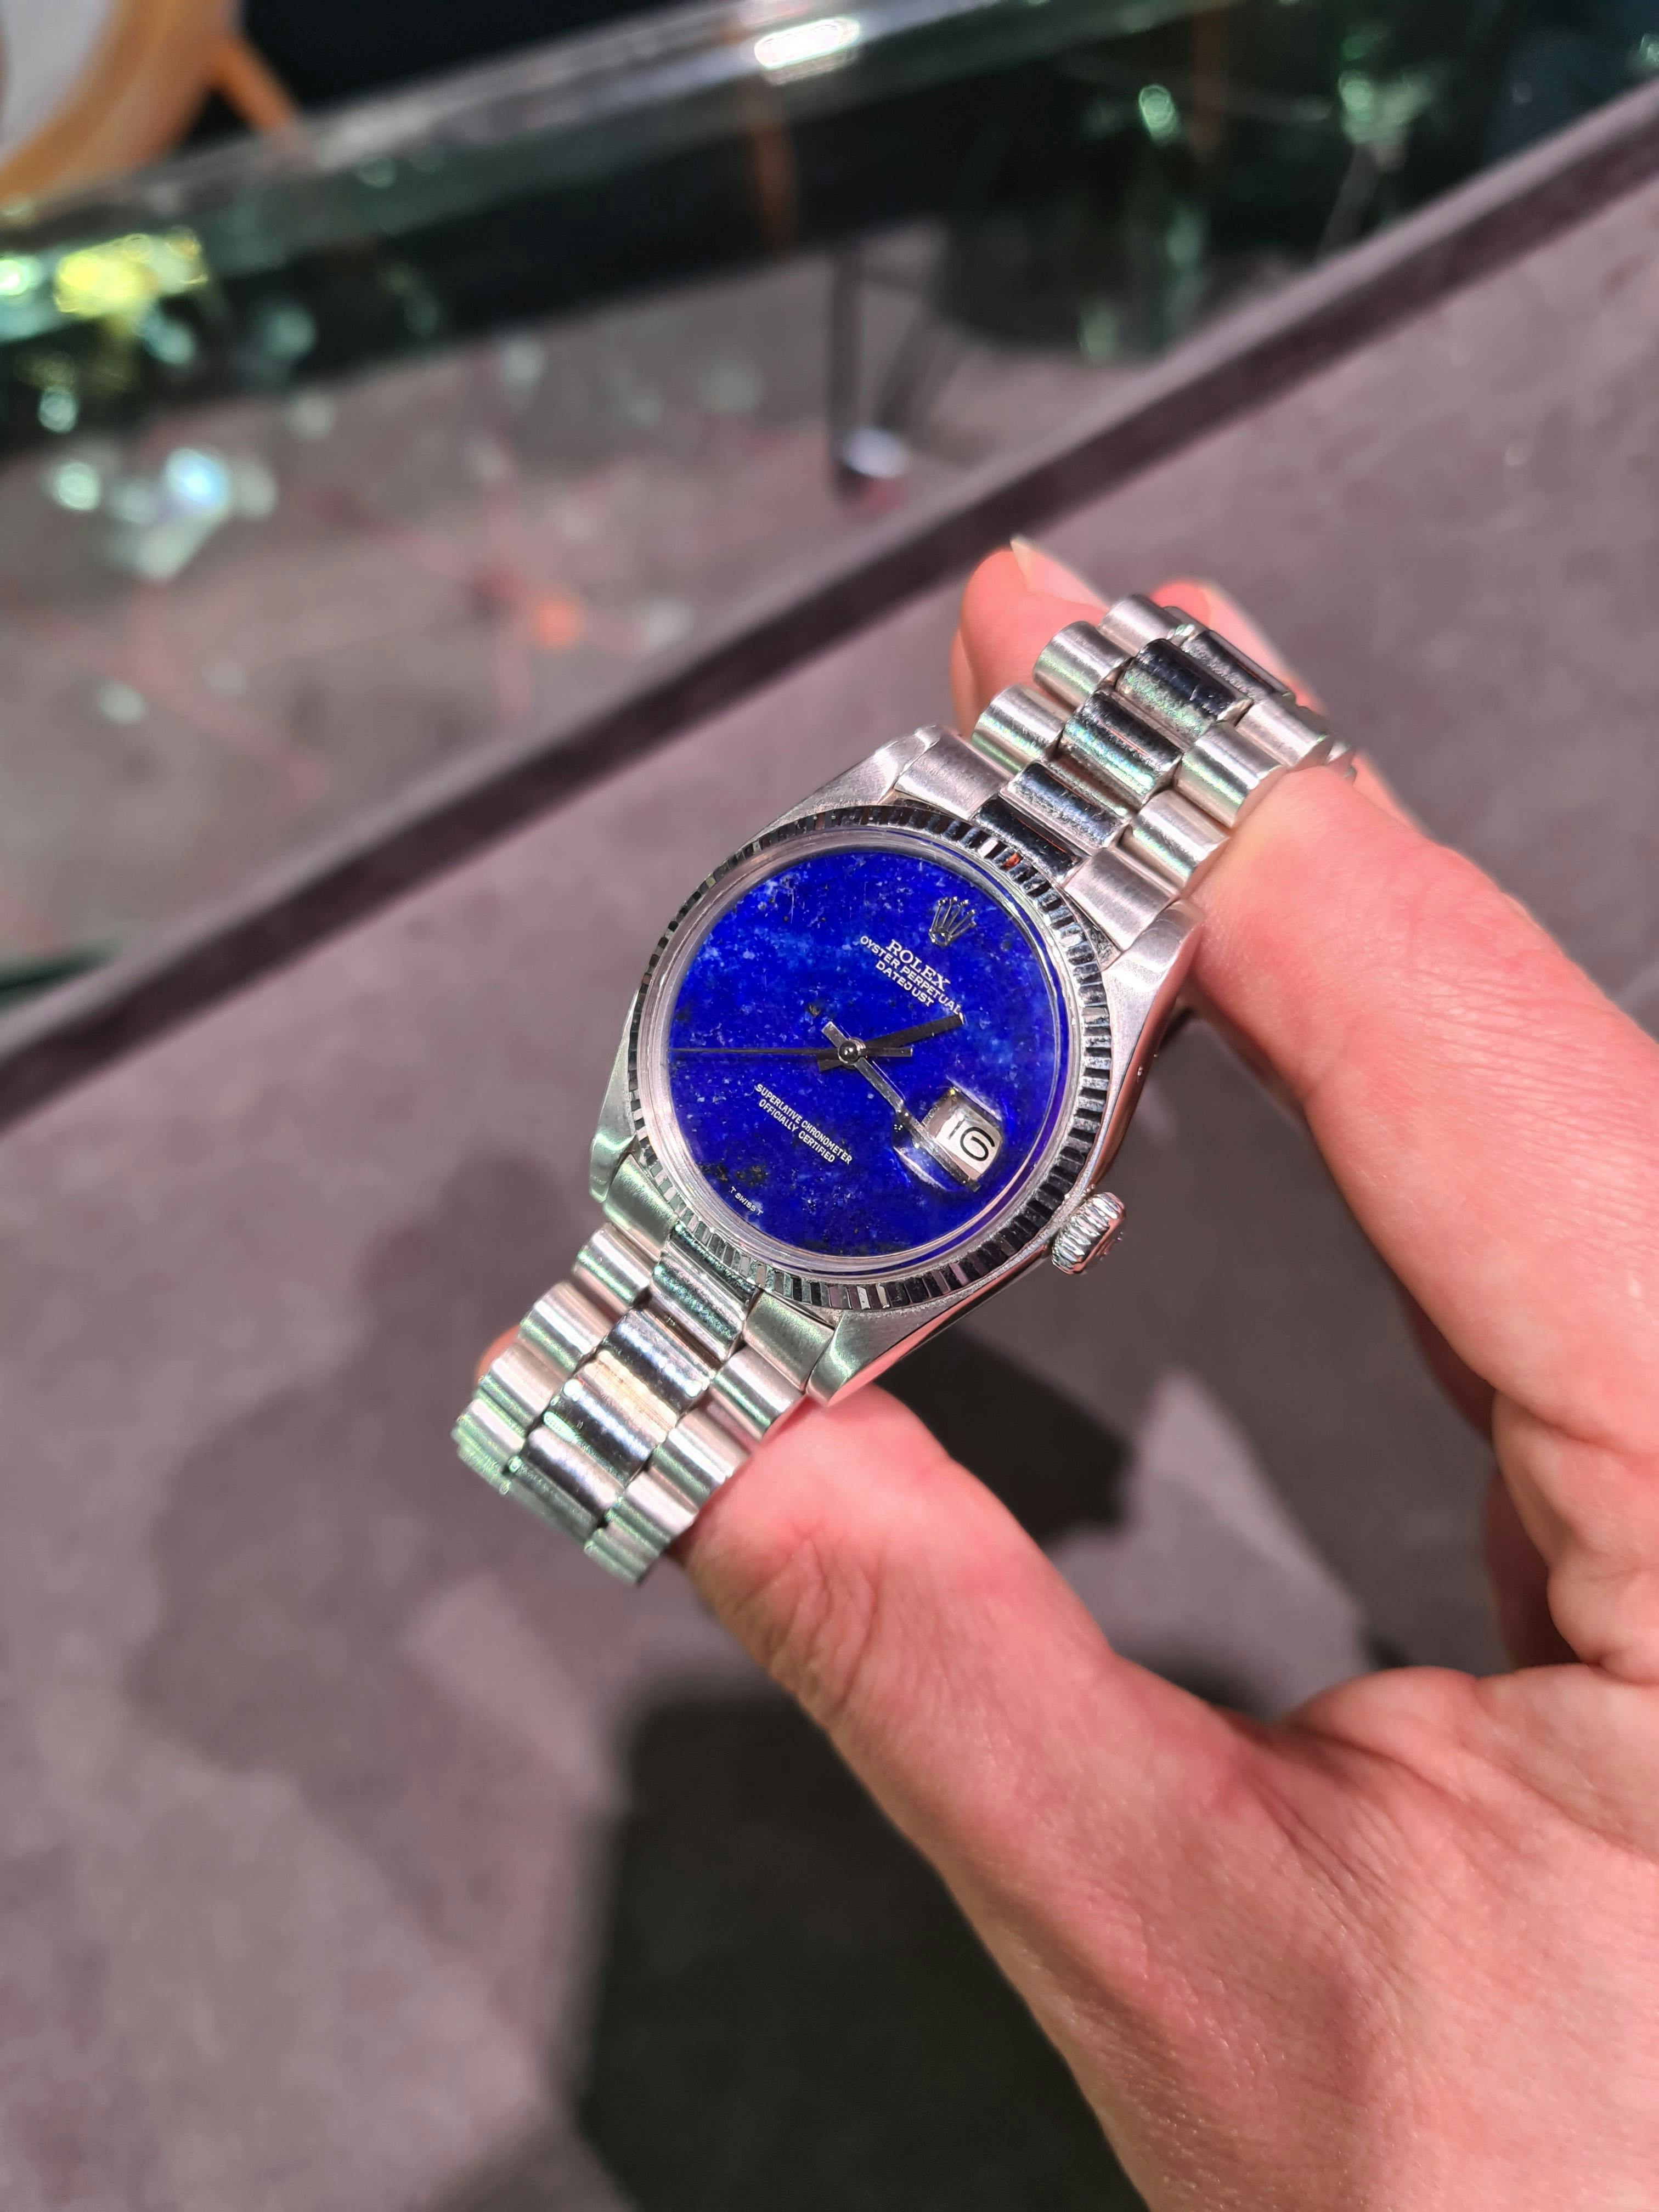 This very rare Rolex Datejust could be sold to a specialist dealer